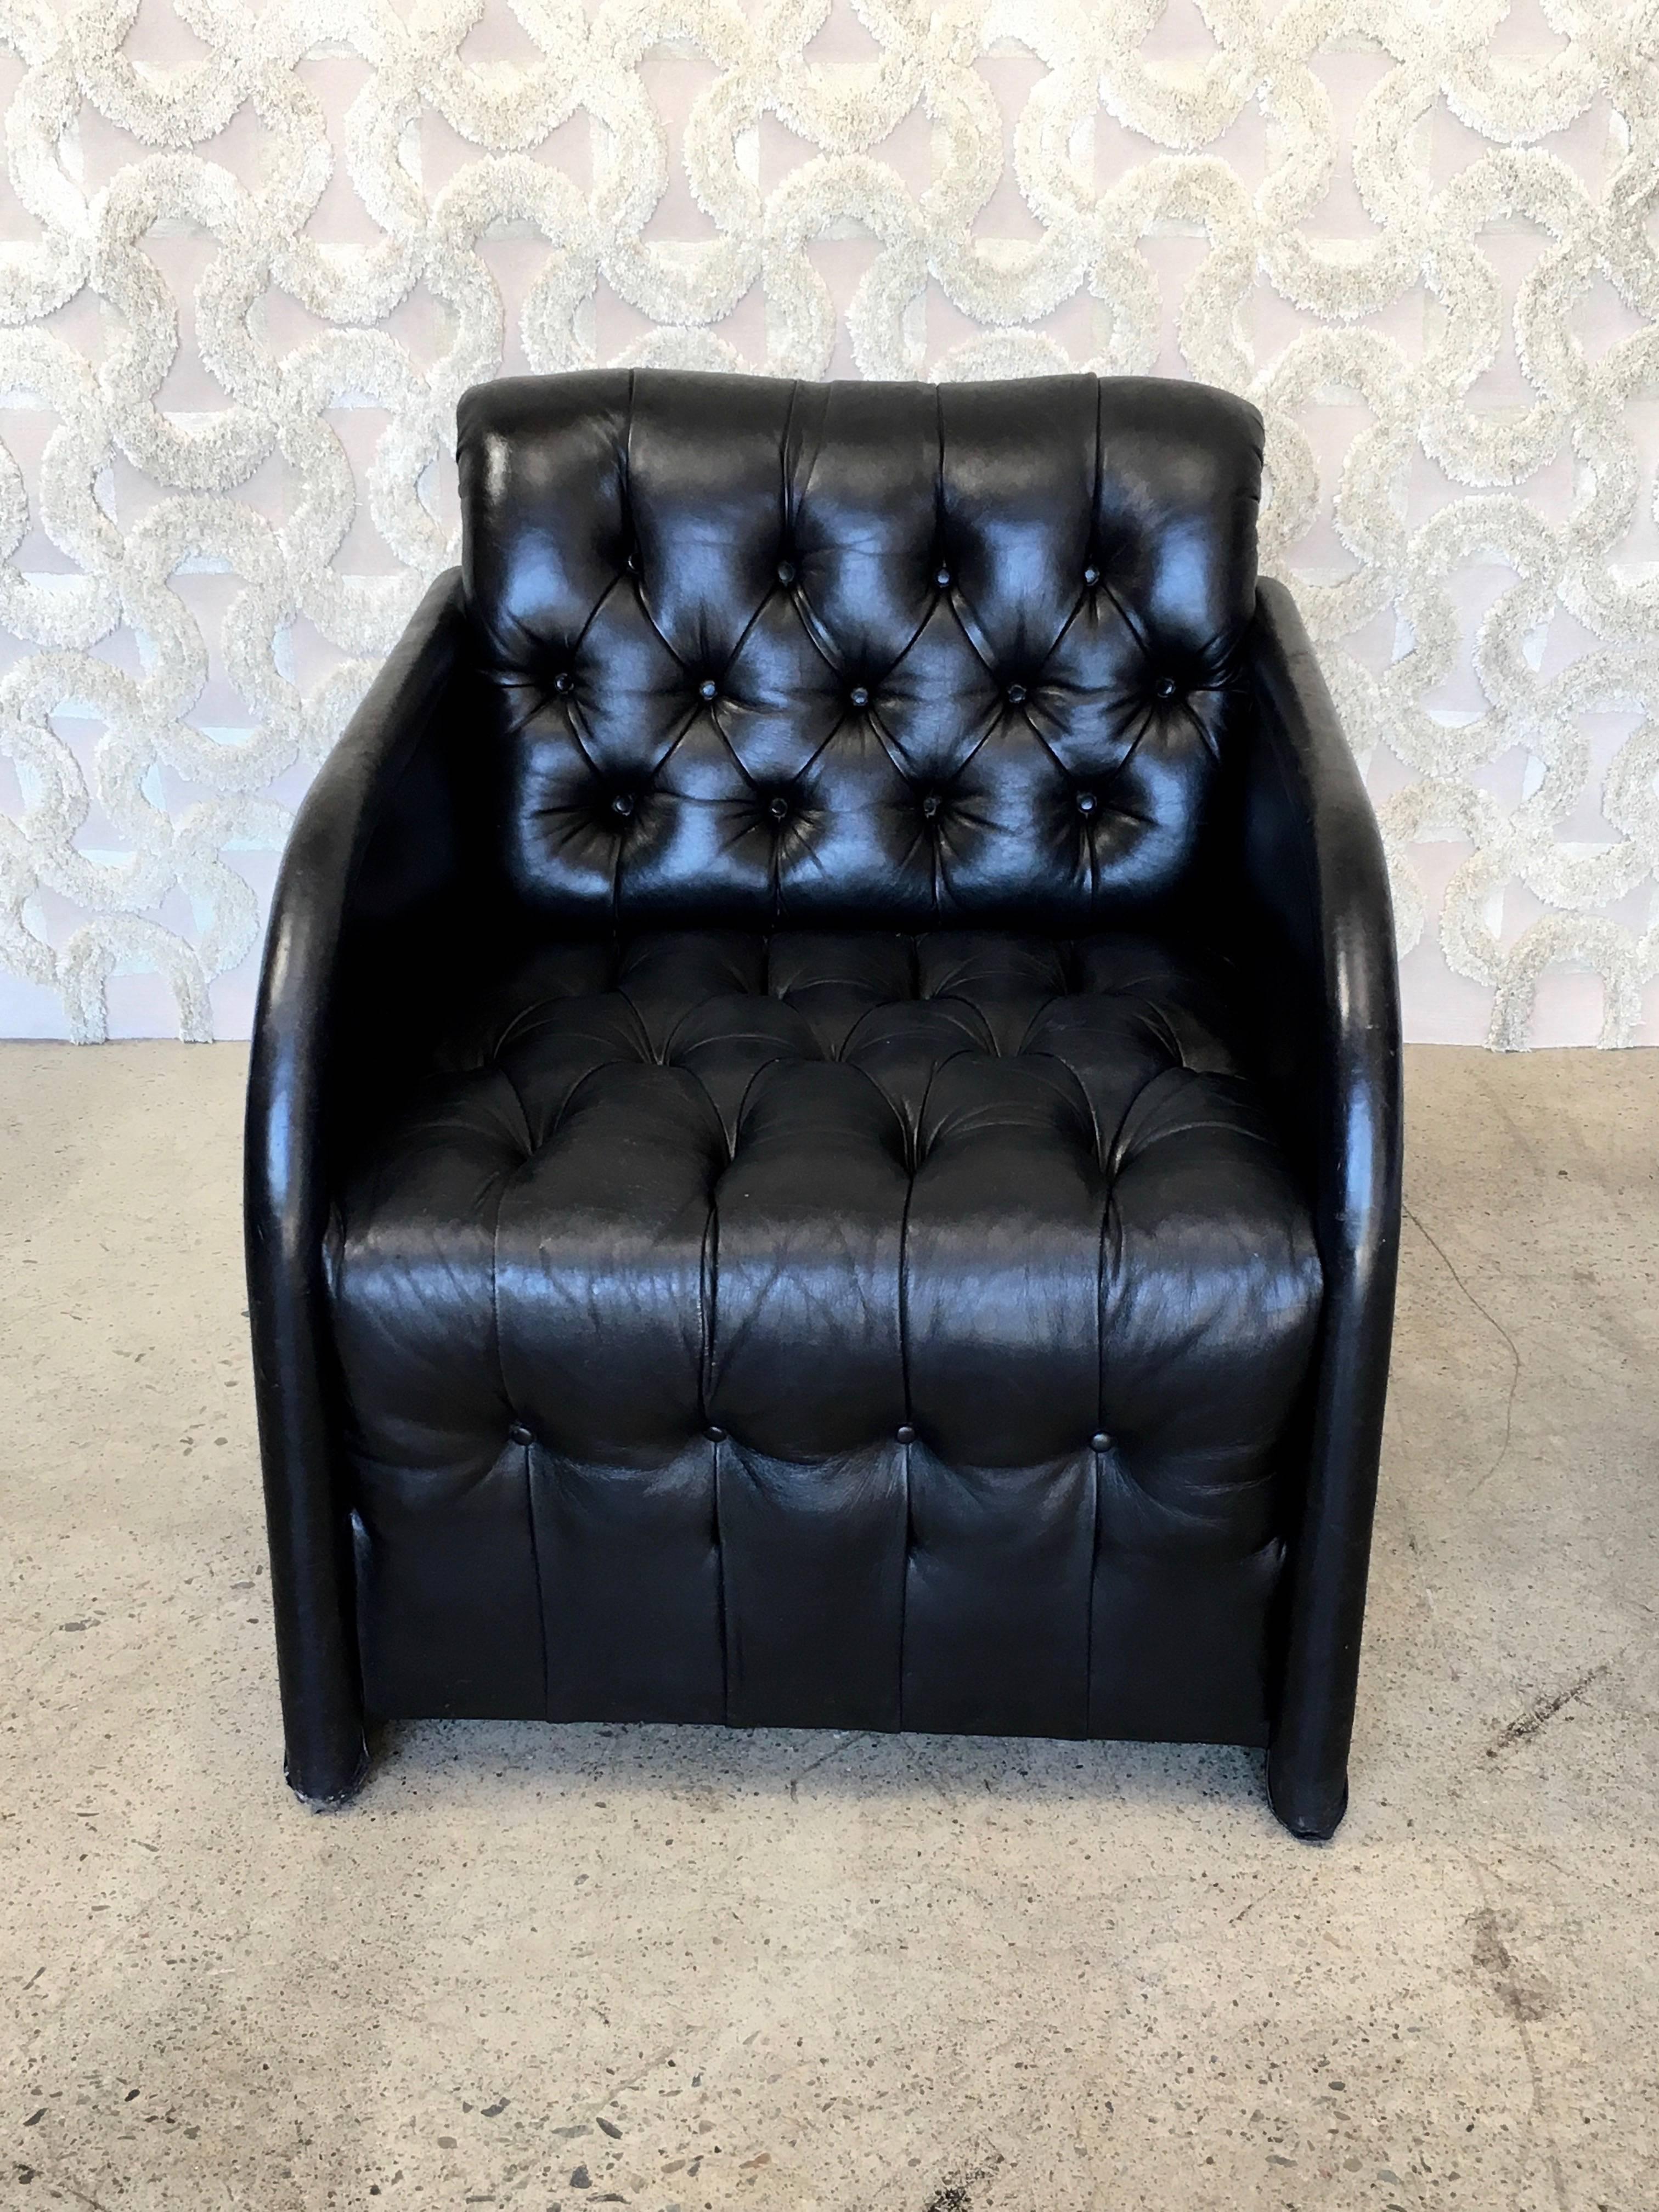 Modernist leather club chair, Art Deco style lounge chair.